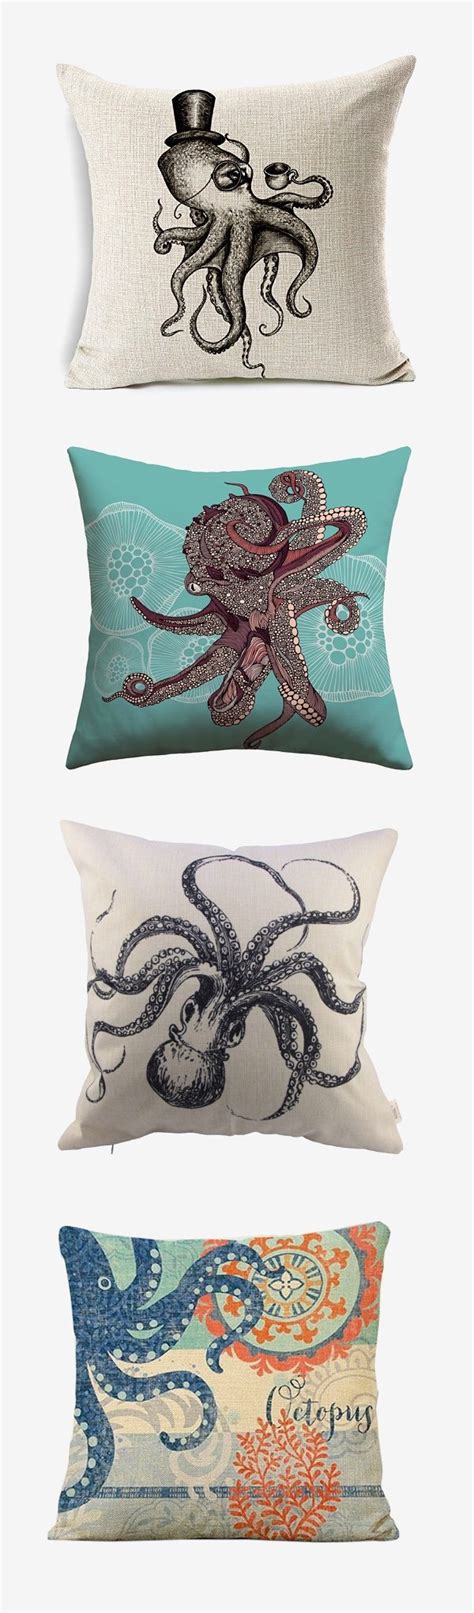 50 Interesting And Unusual Octopus Home Decor Finds Obsigen